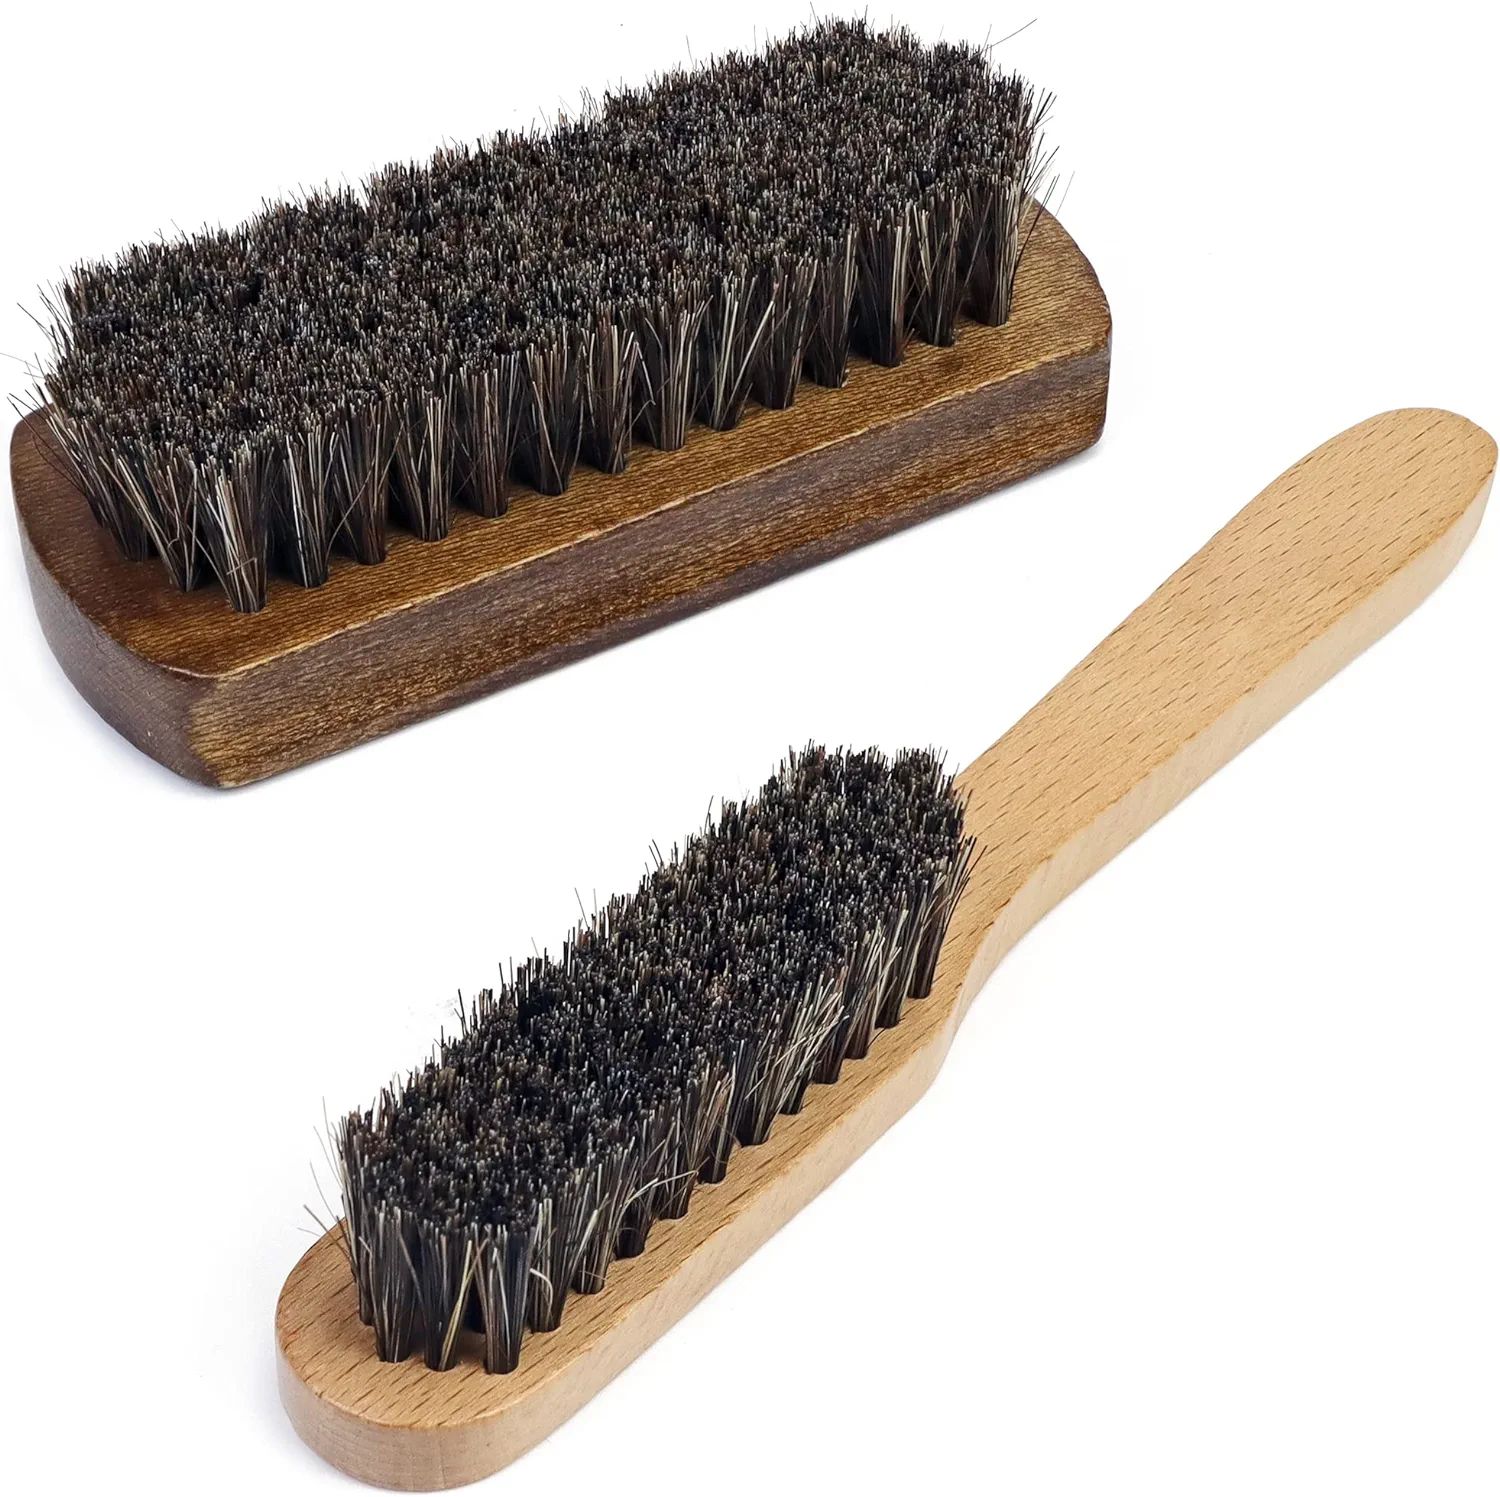 Horsehair Laundry Stain Brushes Set by TAKAVU, Natural Soft Bristle for Scrubbing Out Tough Stain... | Amazon (US)